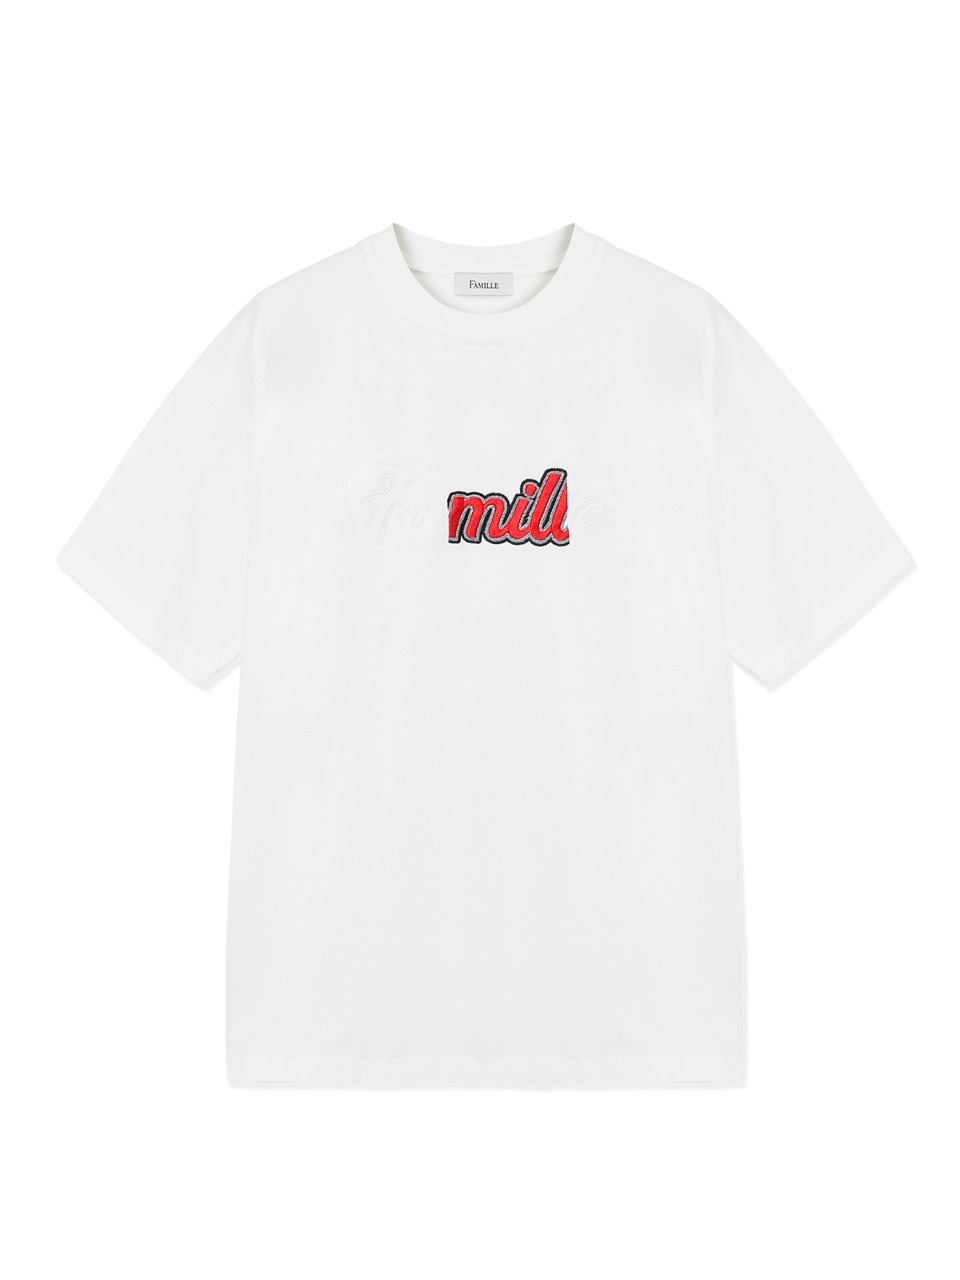 FAMILLE - CONTRAST EMBROIDERY LOGO T-SHIRT (WHITE)